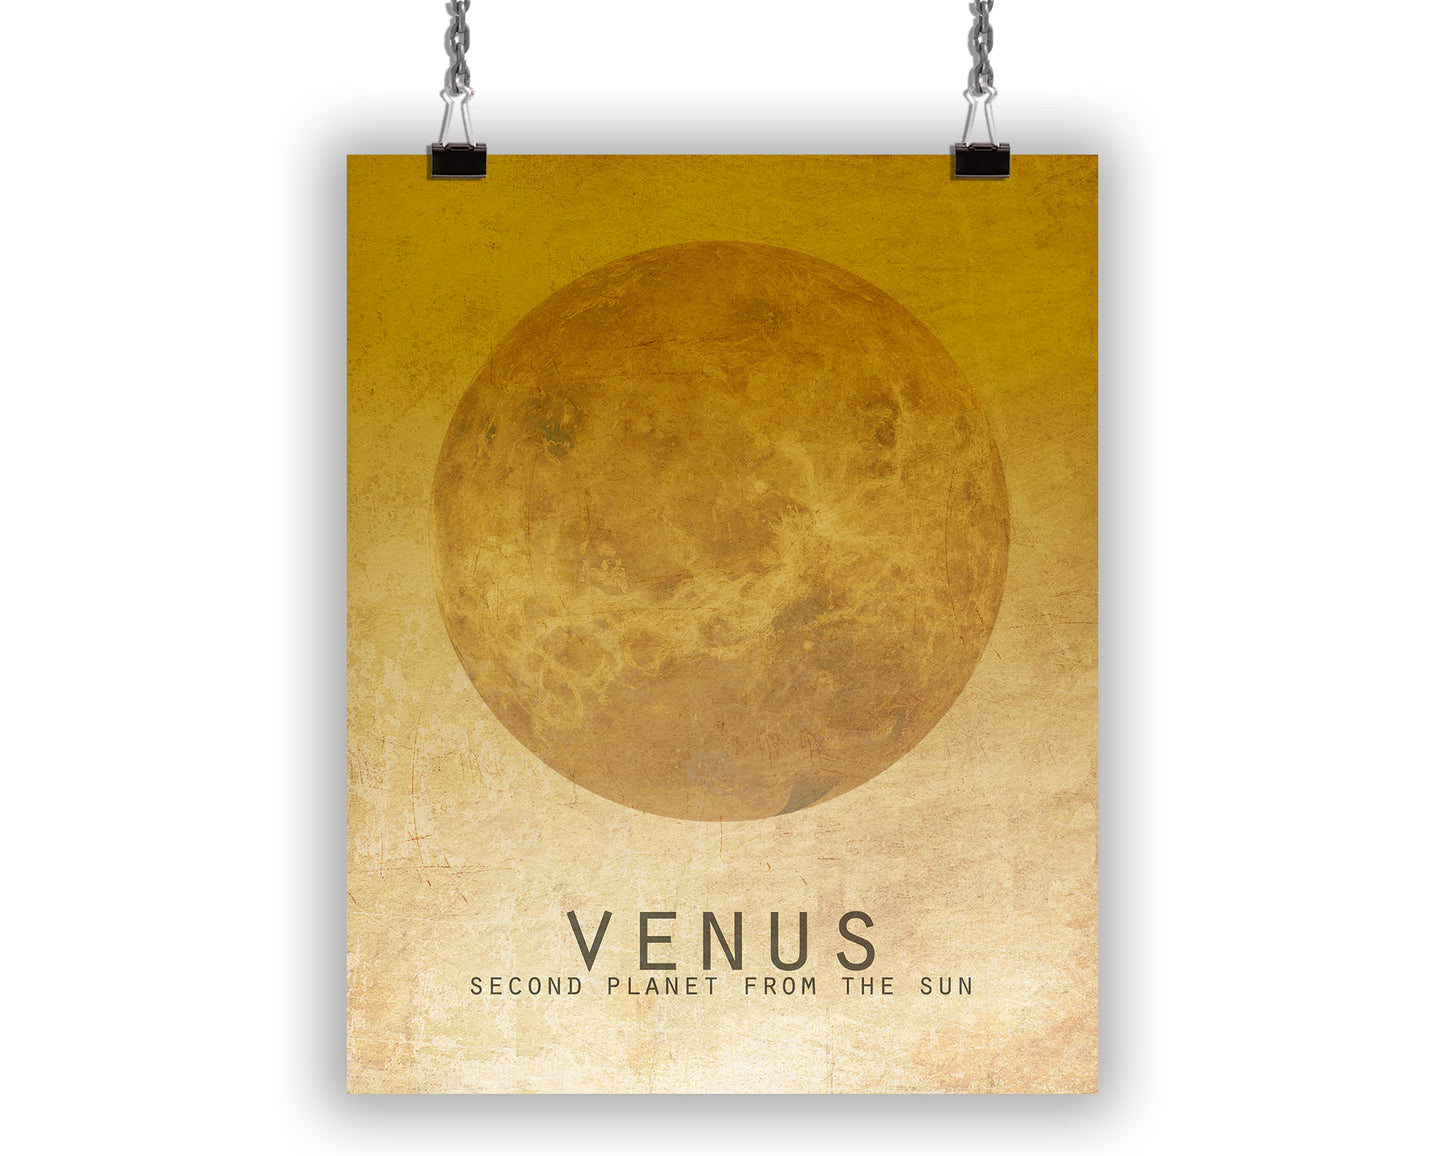 minimalist art print with image of the planet venus in yellow tones